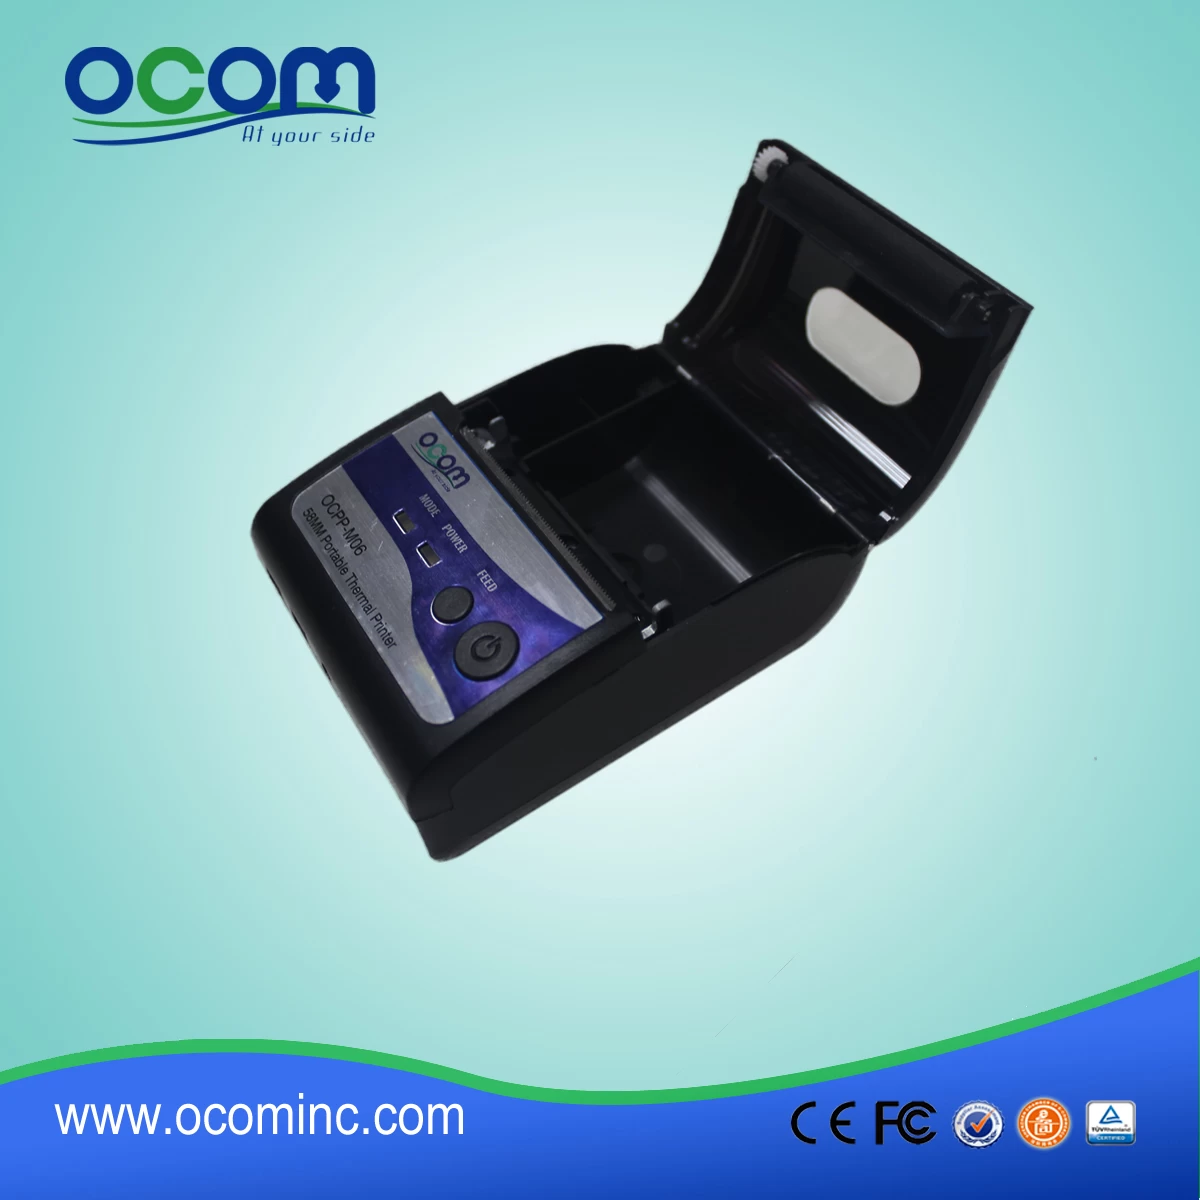 58mm printer ticket machine with reliable moudle  (OCPP-M06)